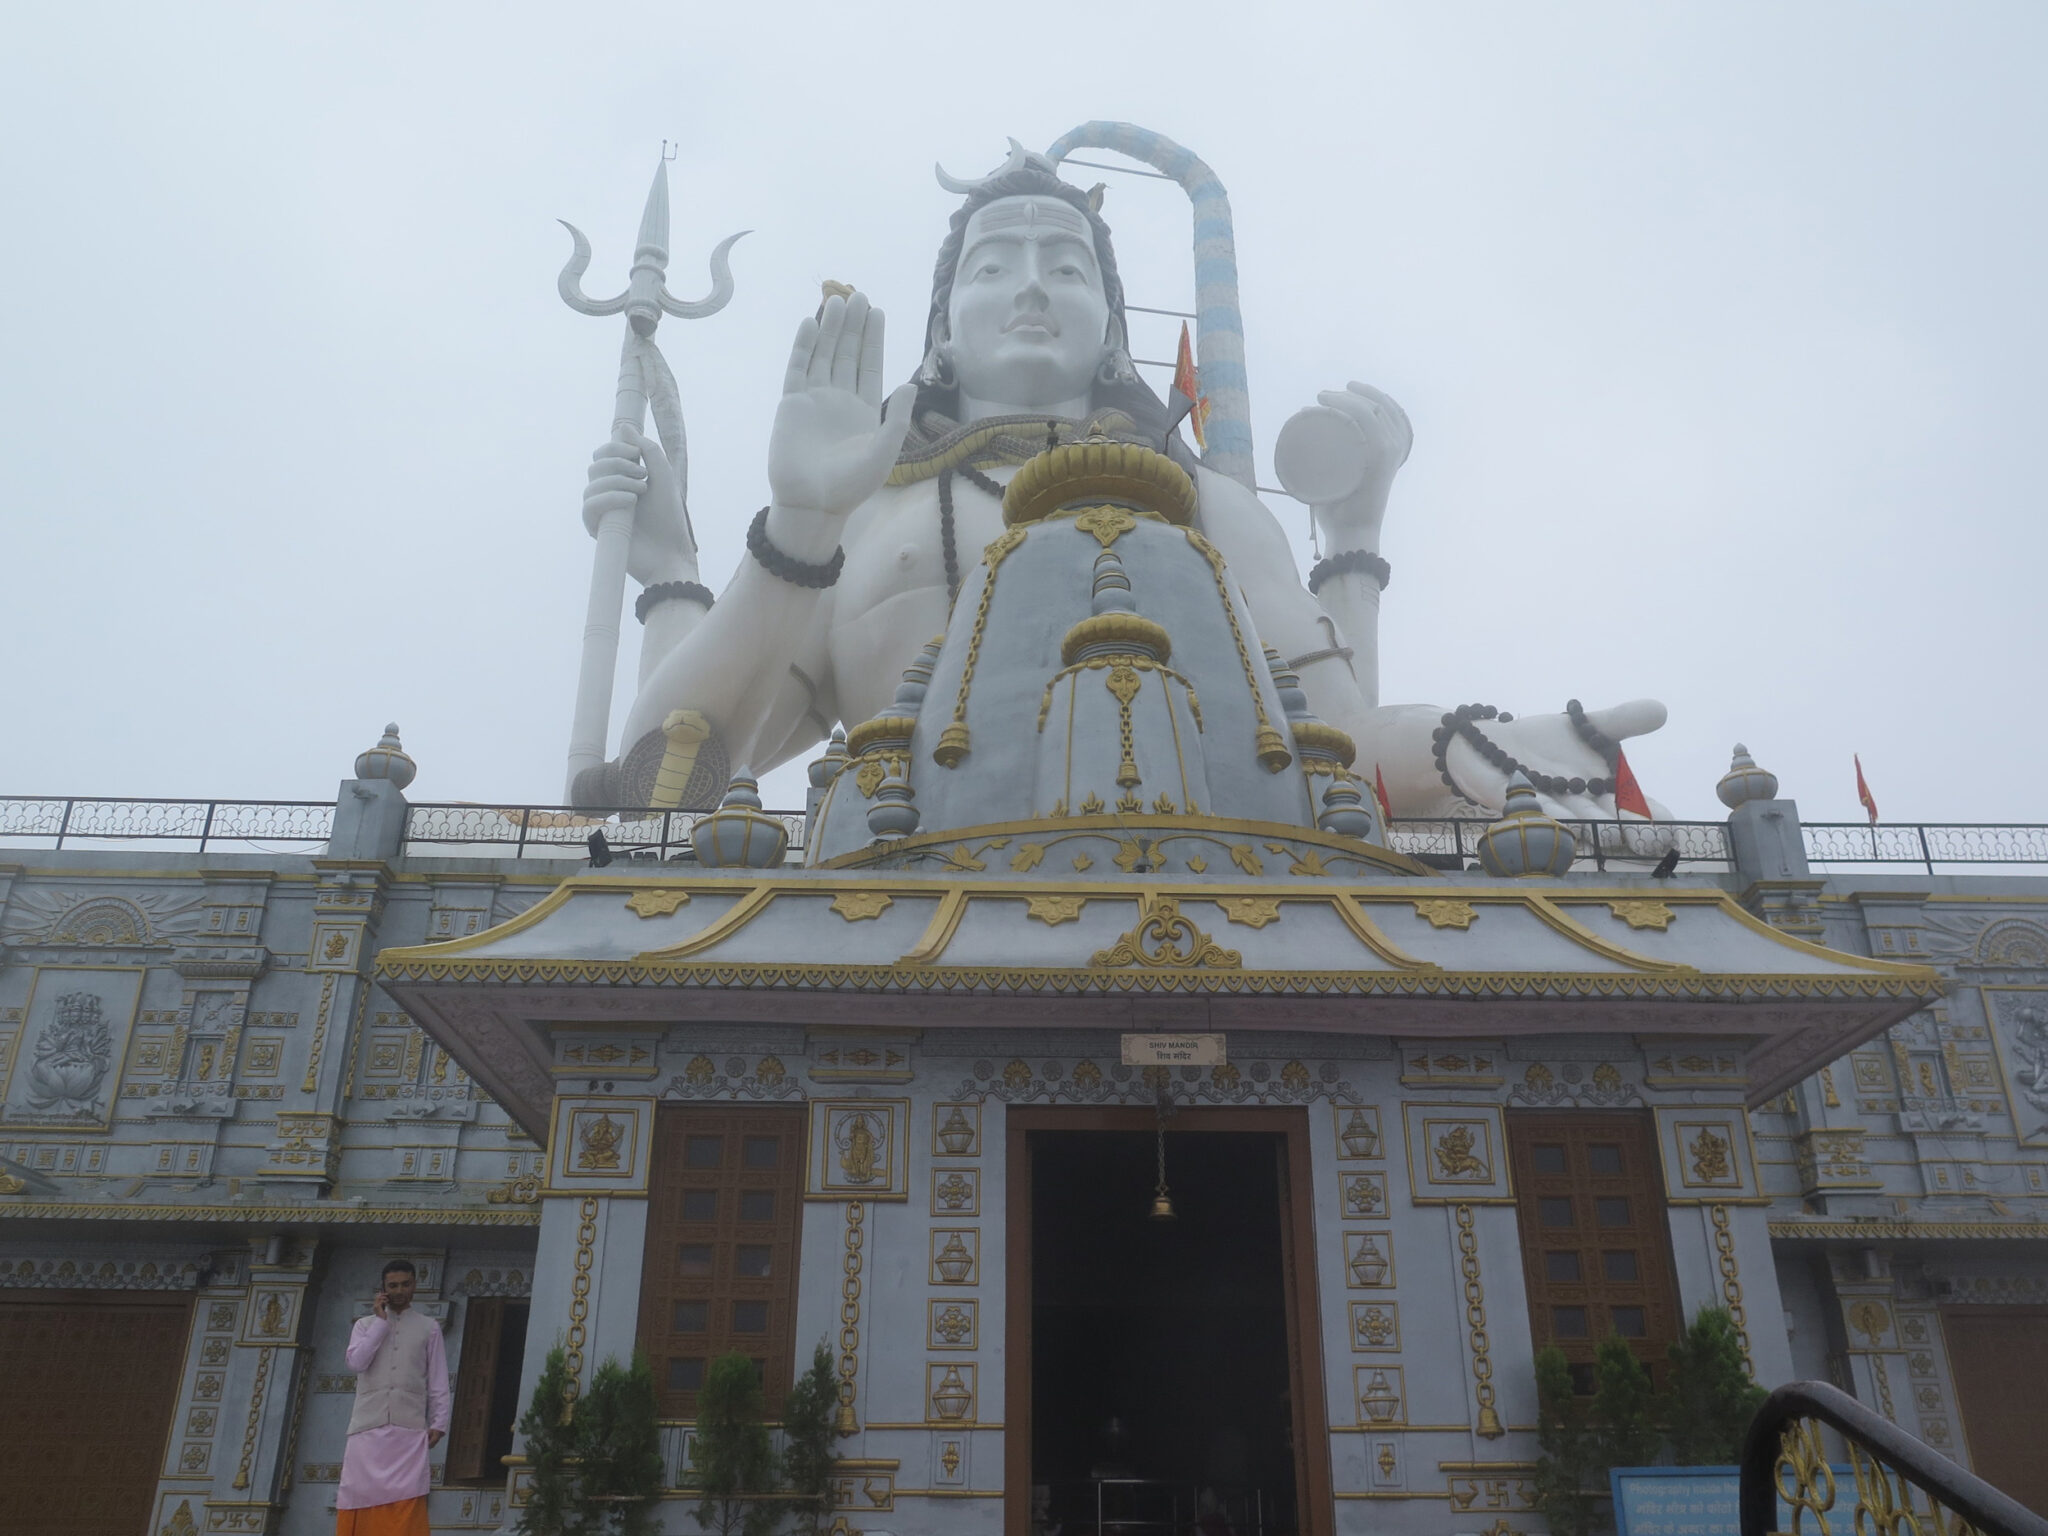 Colossal statue depicting Hindu deity towers above elaborately decorated gold and white entrance to plinth